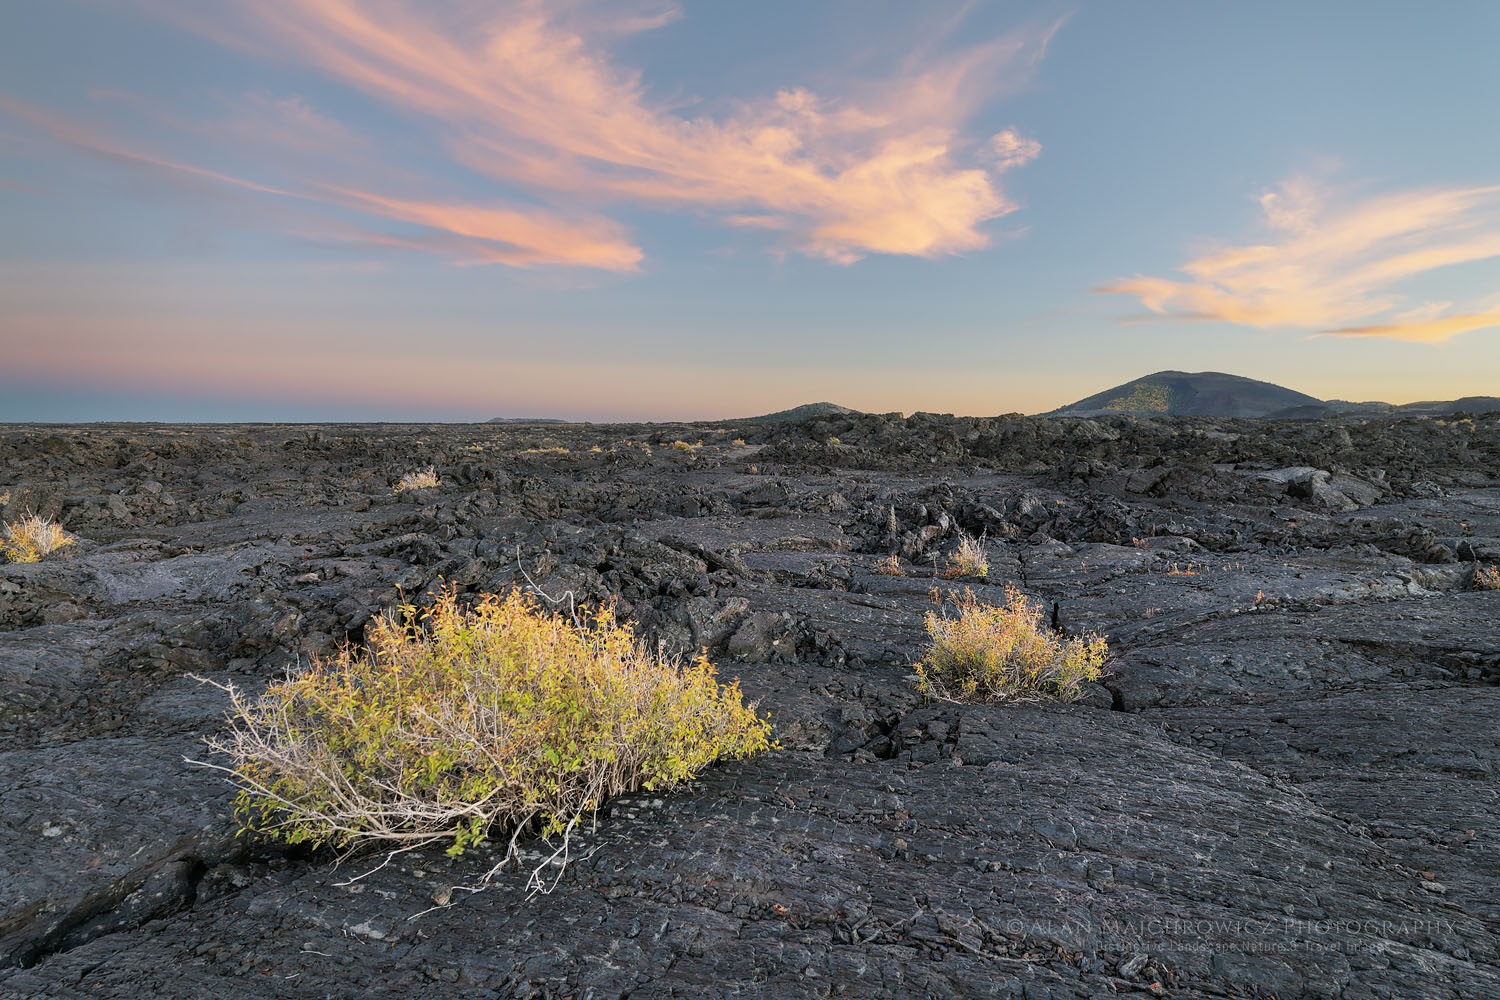 Twilight alpenglow over Blue Dragon Lava Flow, Craters of the Moon National Monument #73905